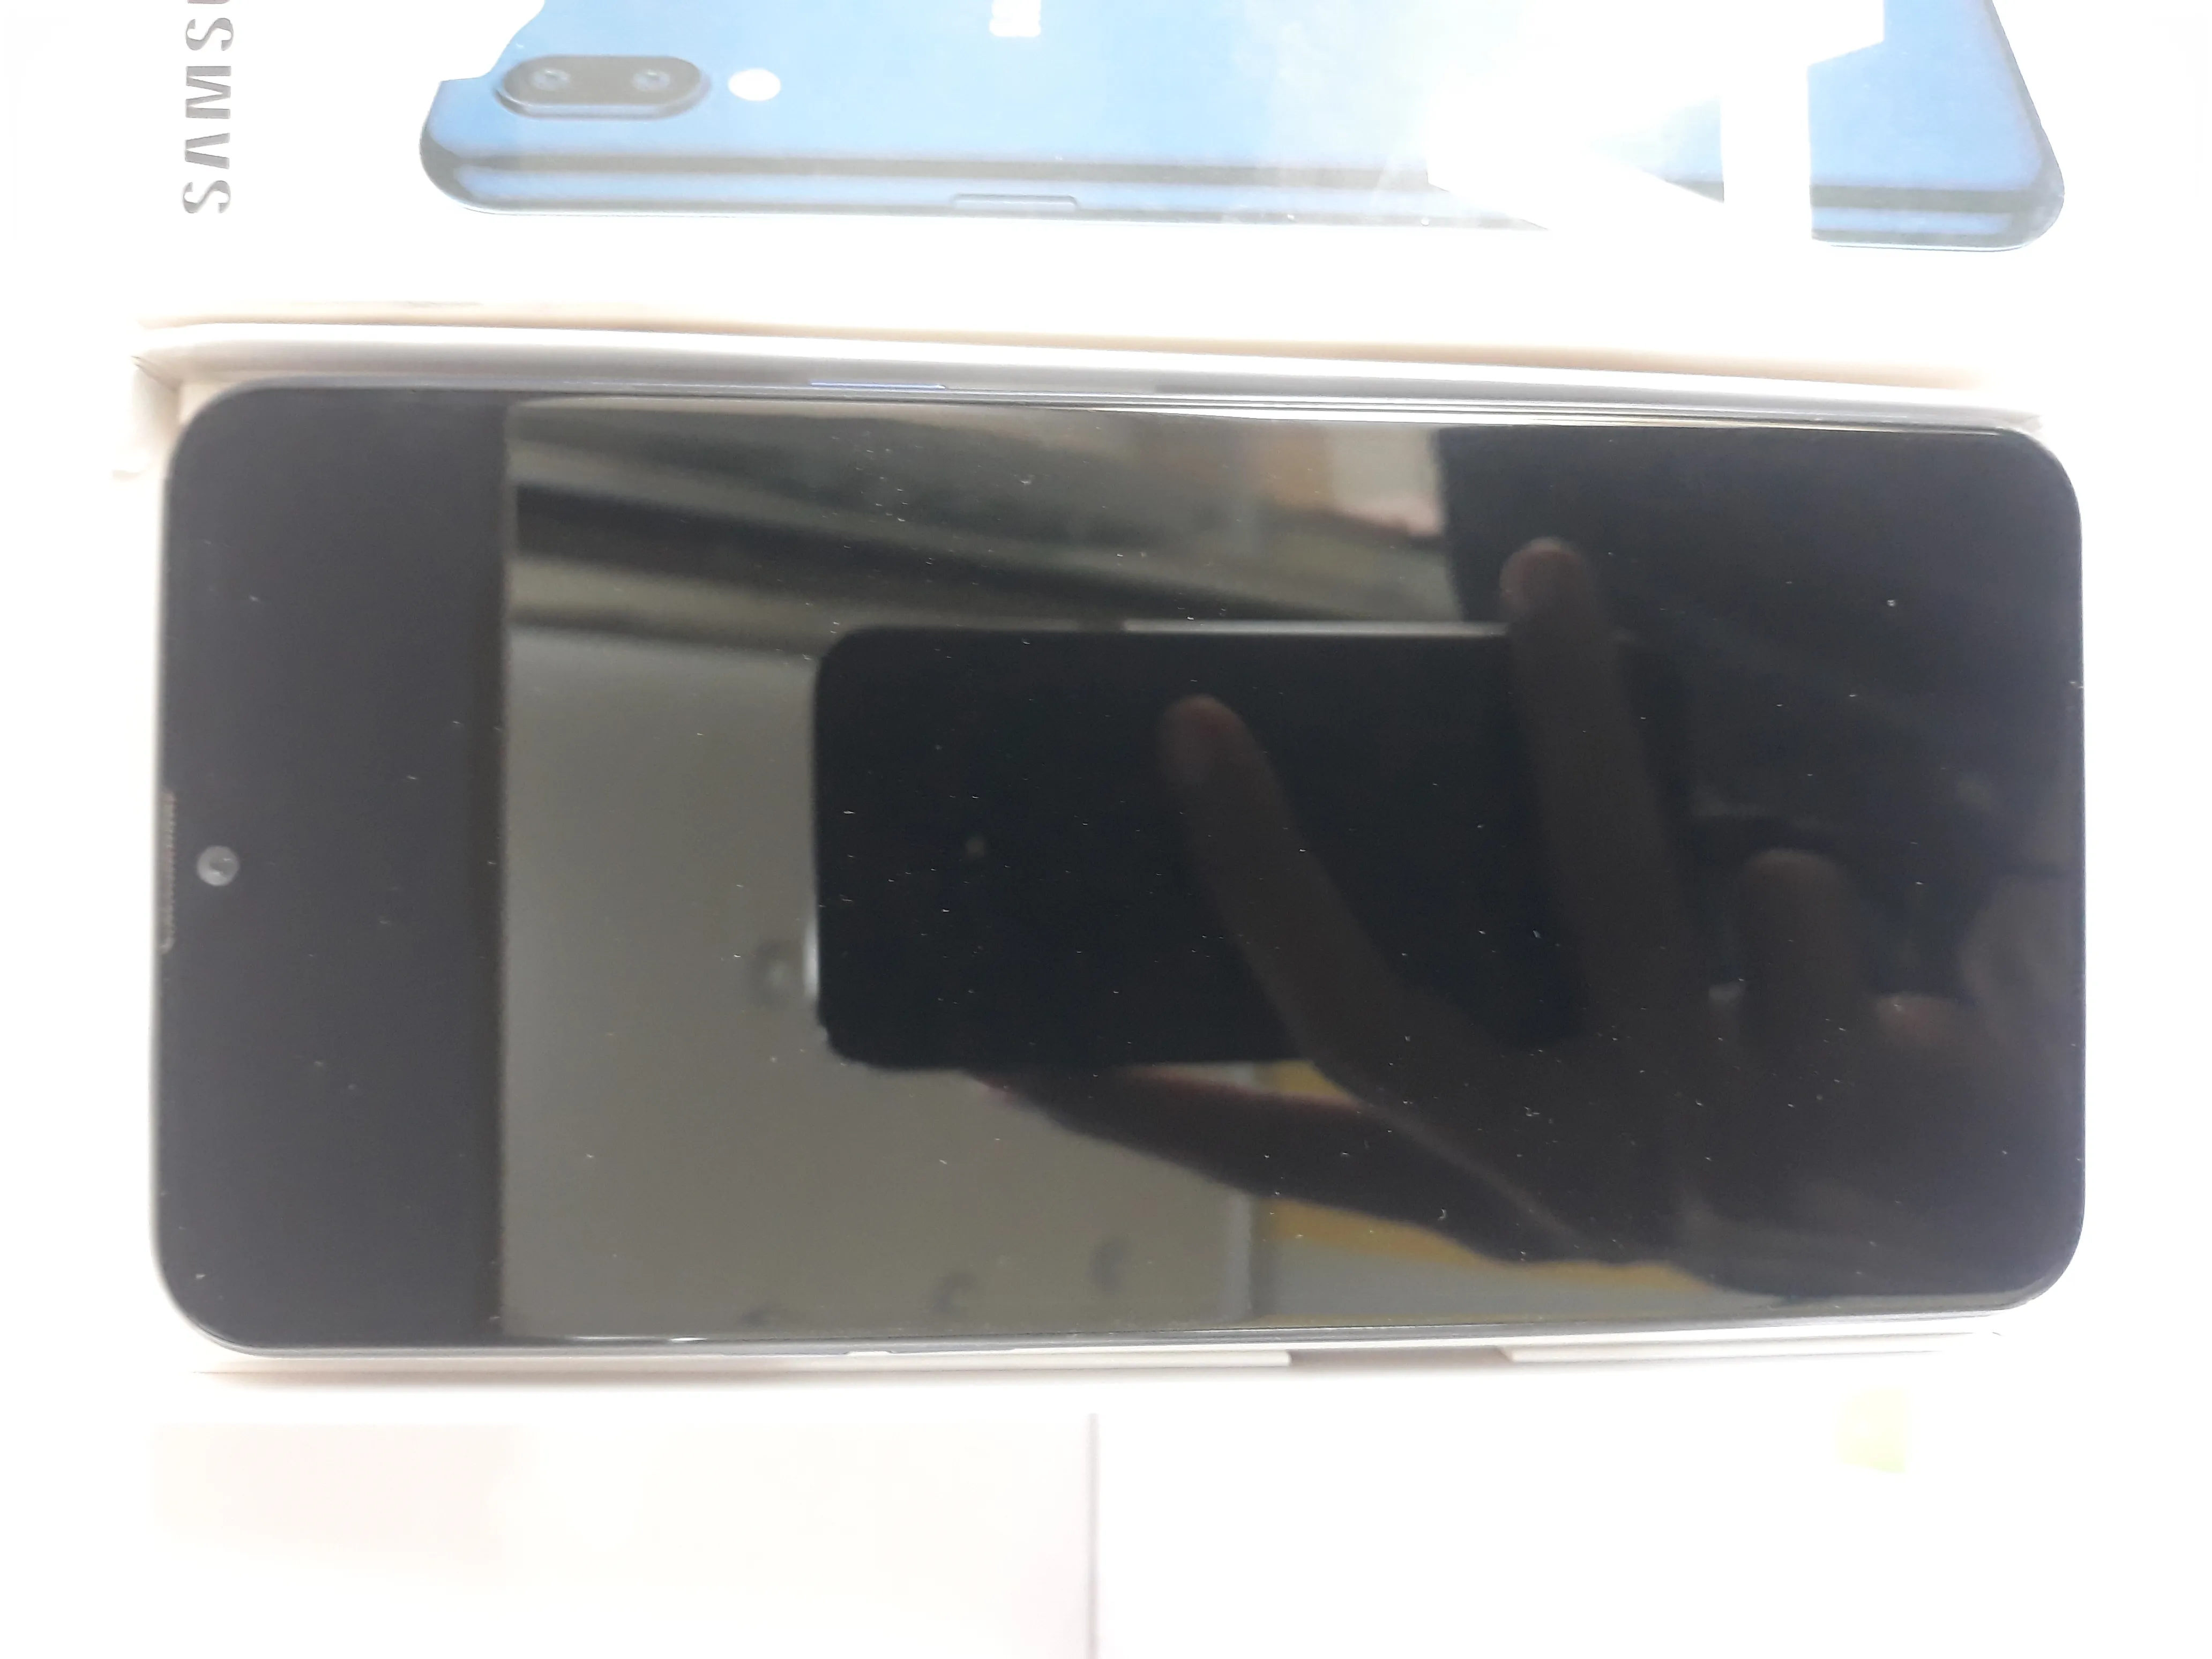 samsung a10s Mobile with Box - photo 2